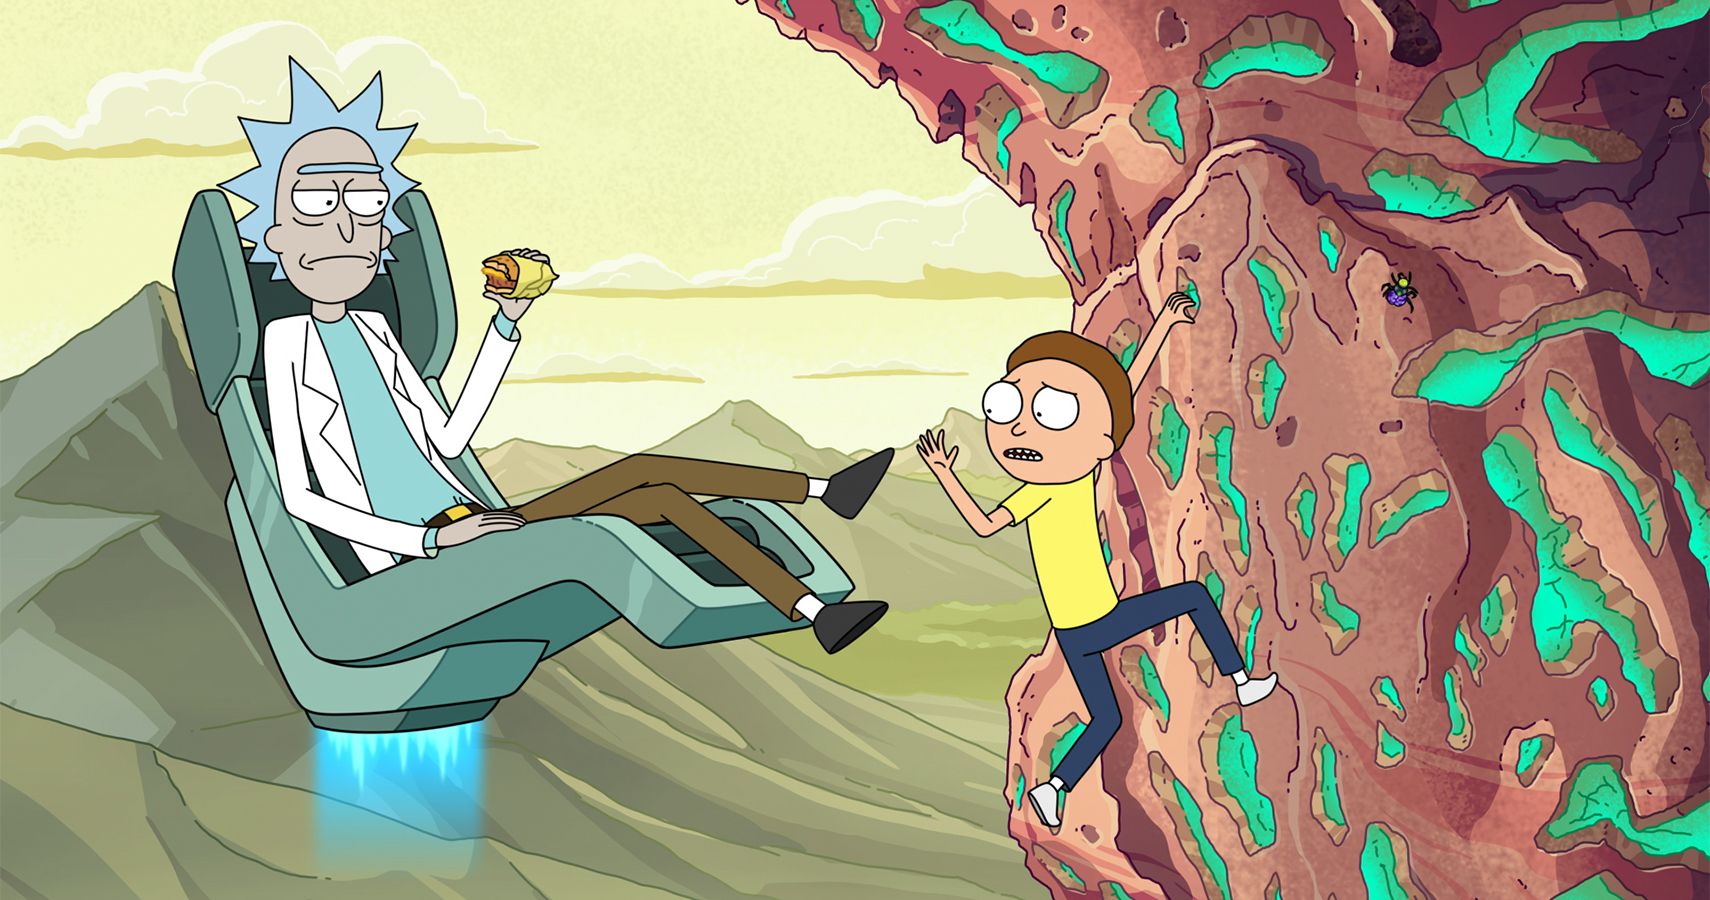 Get Schwifty With These 10 BehindTheScenes Facts About Rick And Morty